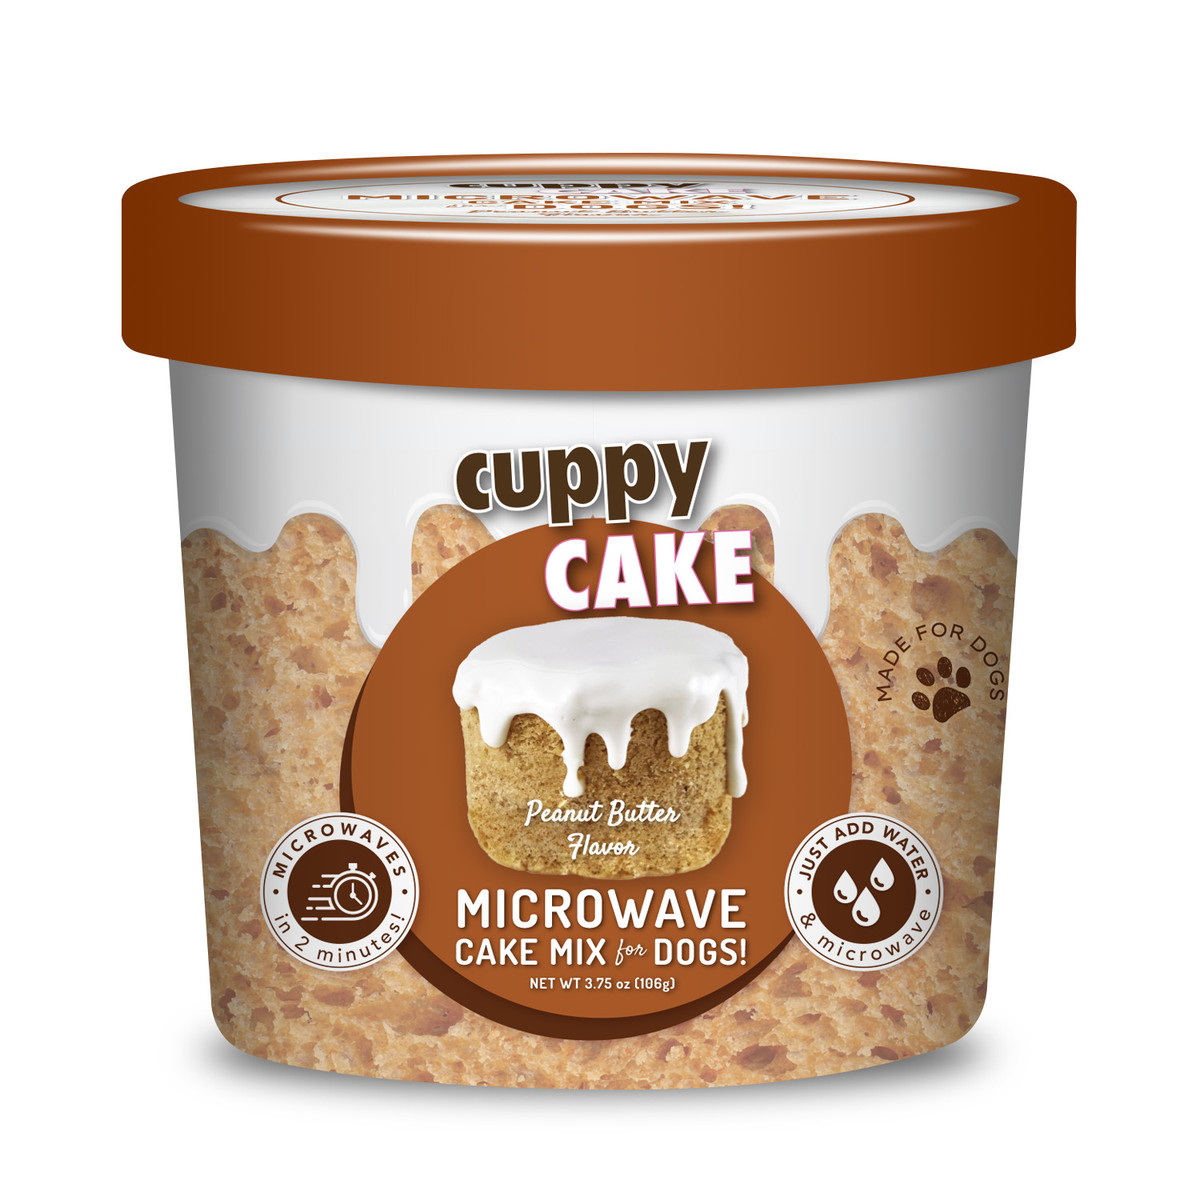 Cuppy Cake Microwave Dog Cake Mix - Peanut Butter